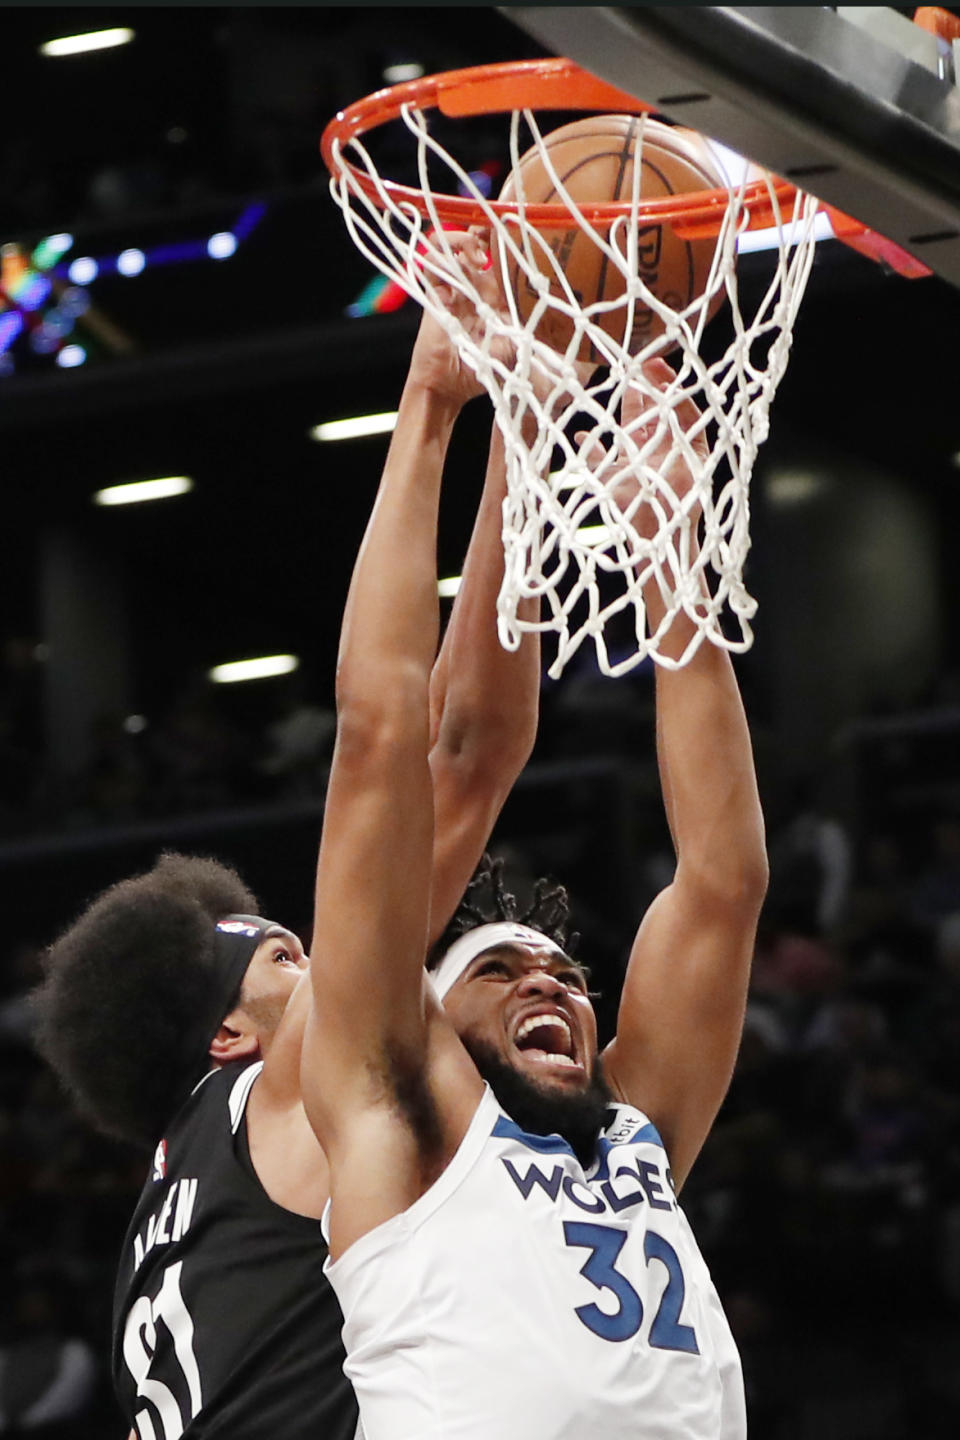 Brooklyn Nets center Jarrett Allen (31) defends against Minnesota Timberwolves center Karl-Anthony Towns (32) during the first half of an NBA basketball game Wednesday, Oct. 23, 2019, in New York. (AP Photo/Kathy Willens)